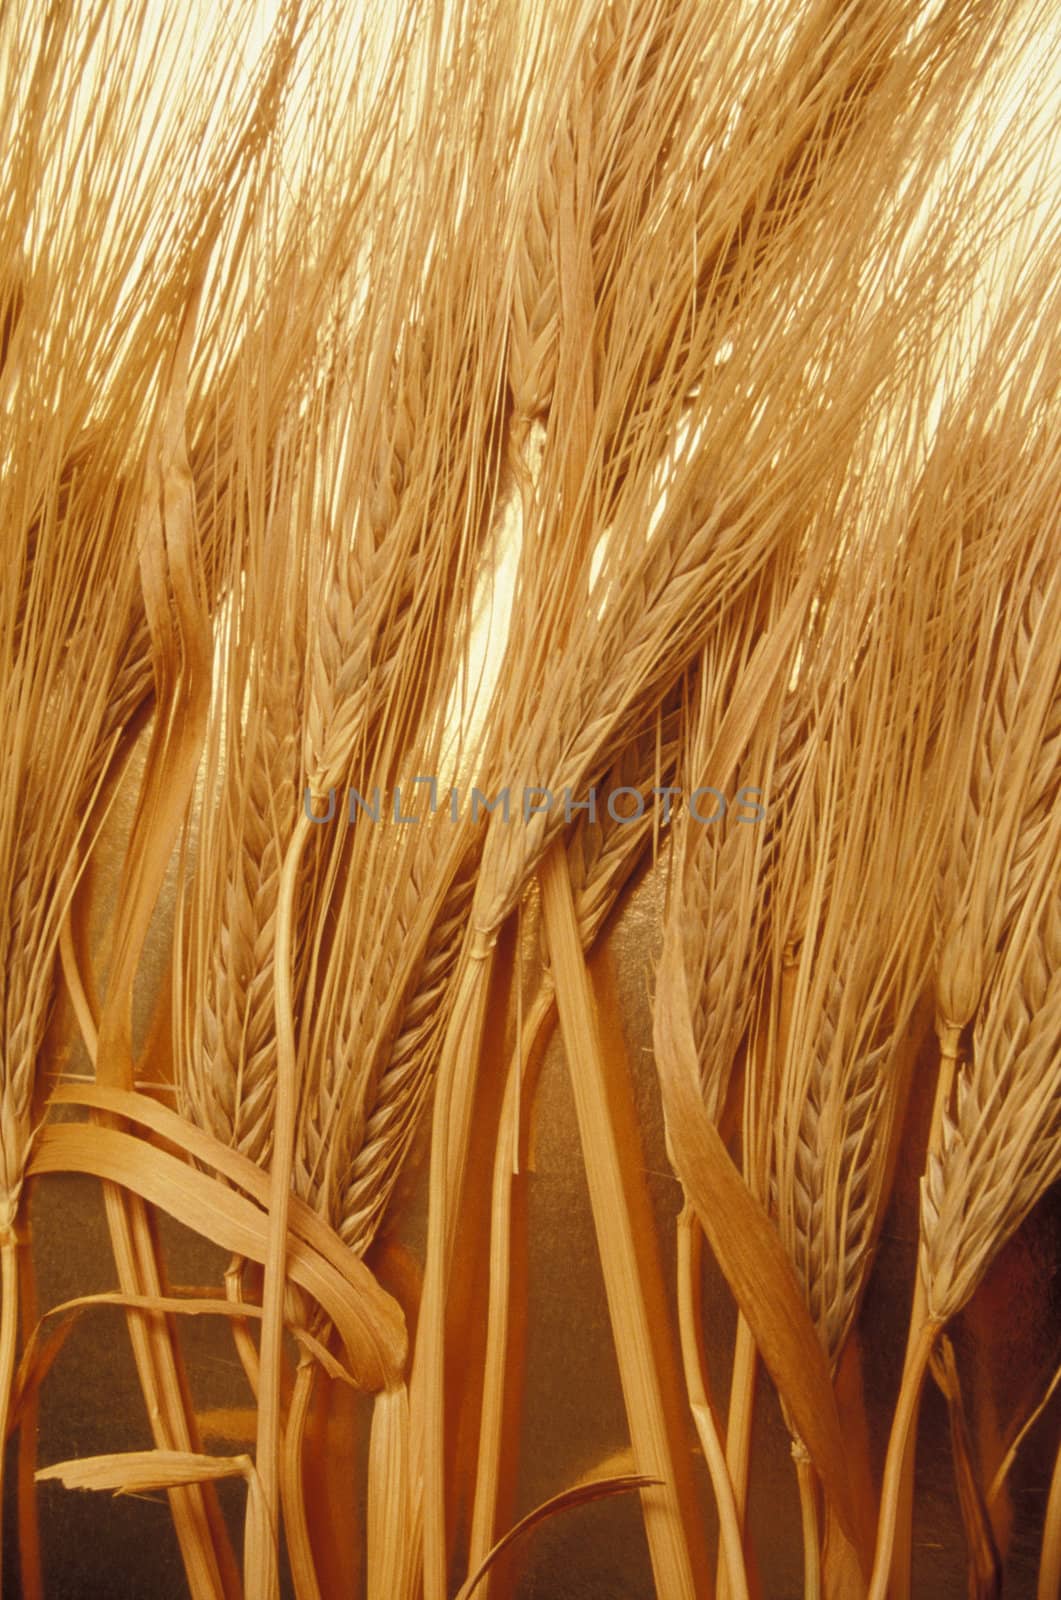 Close-up of stalks and heads of wheat
